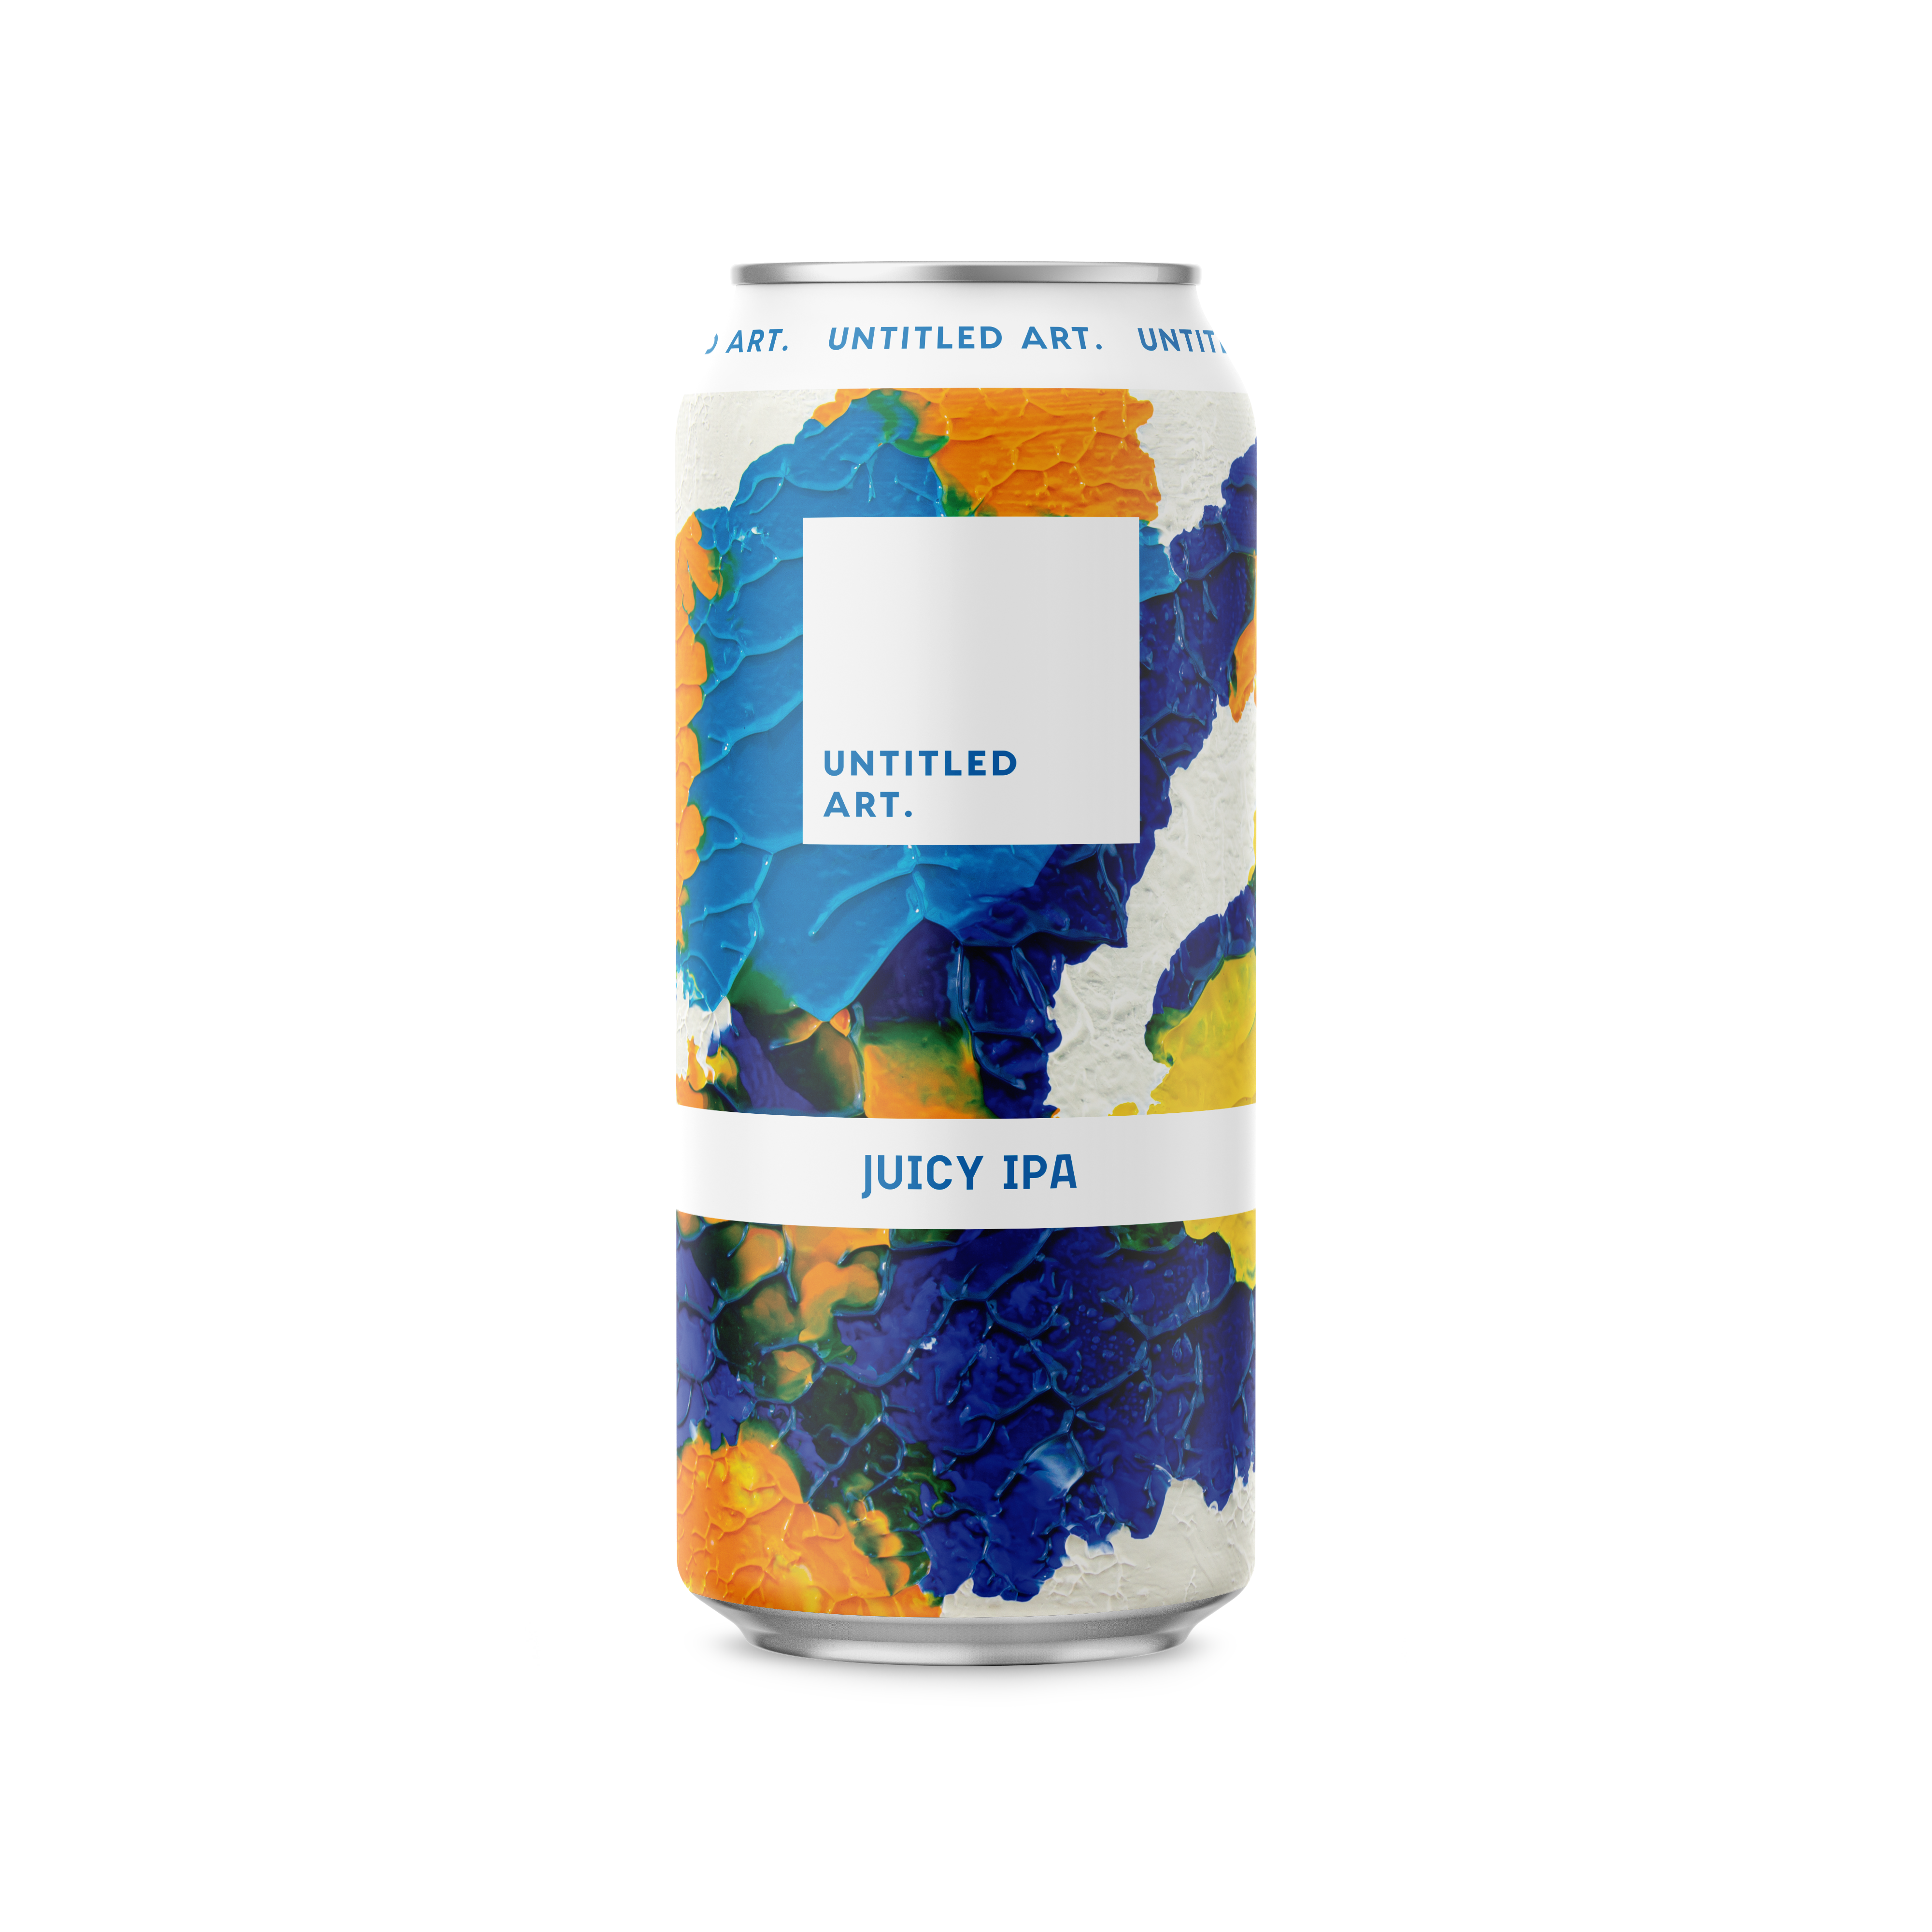 A can of beer with a blue and orange design.